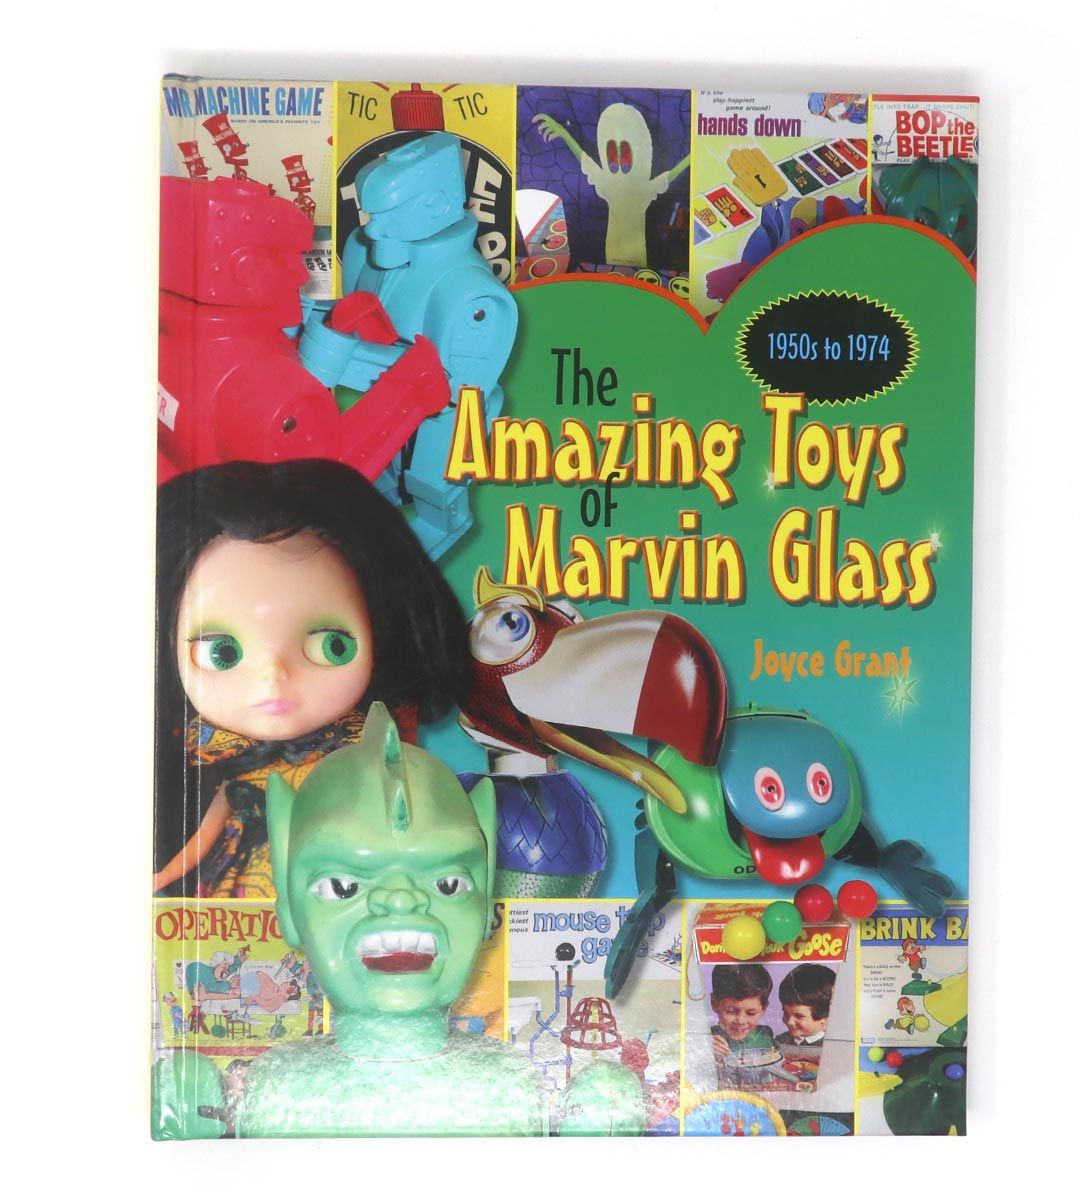 The Amazing Toys of Marvin Glas